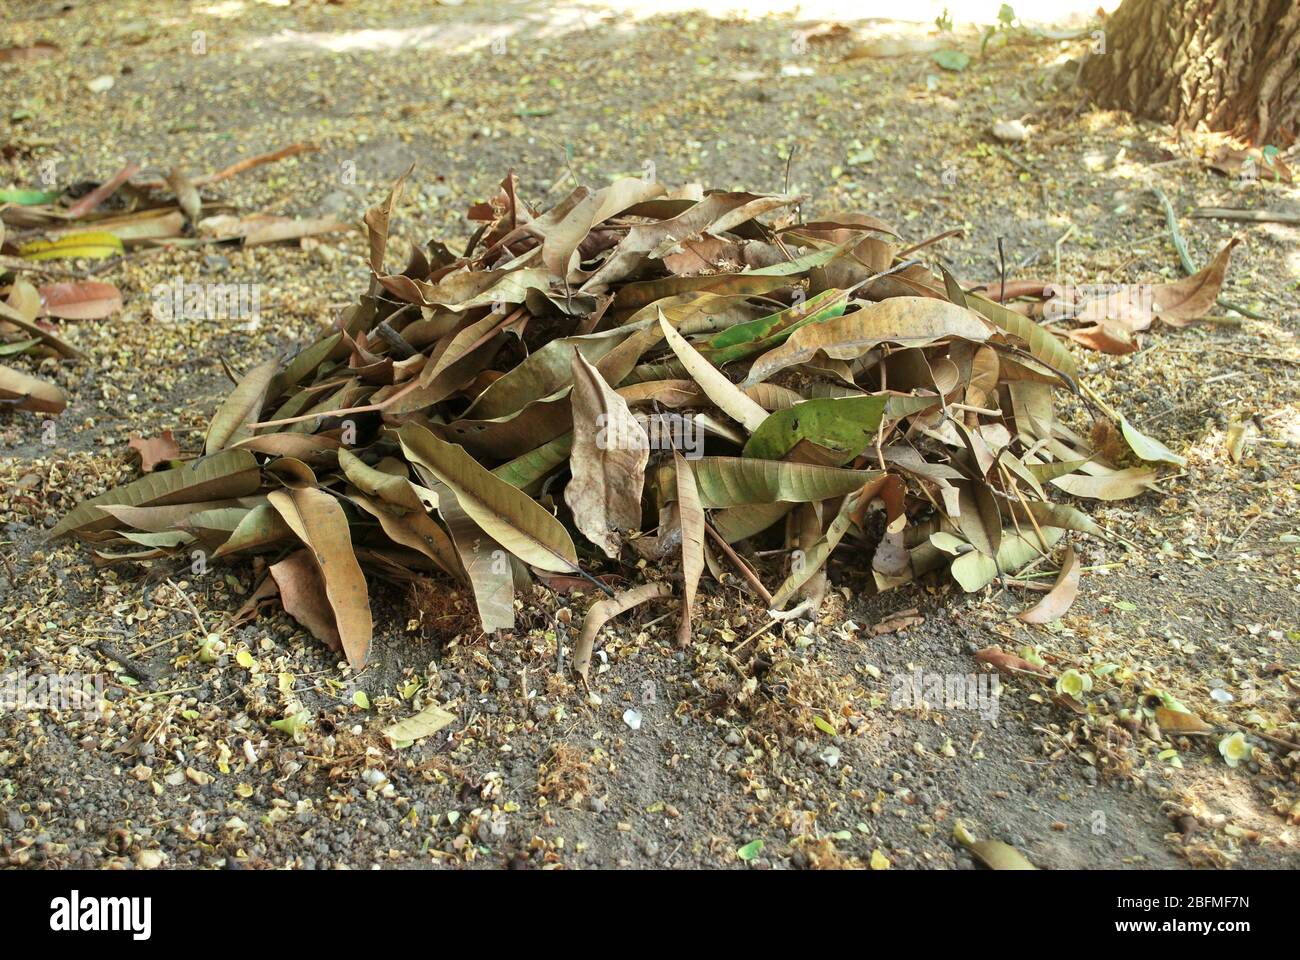 Organic fertilizer from the leaves to ferment themselves.Natural dry leaves that have fallen by themselves.; Stock Photo